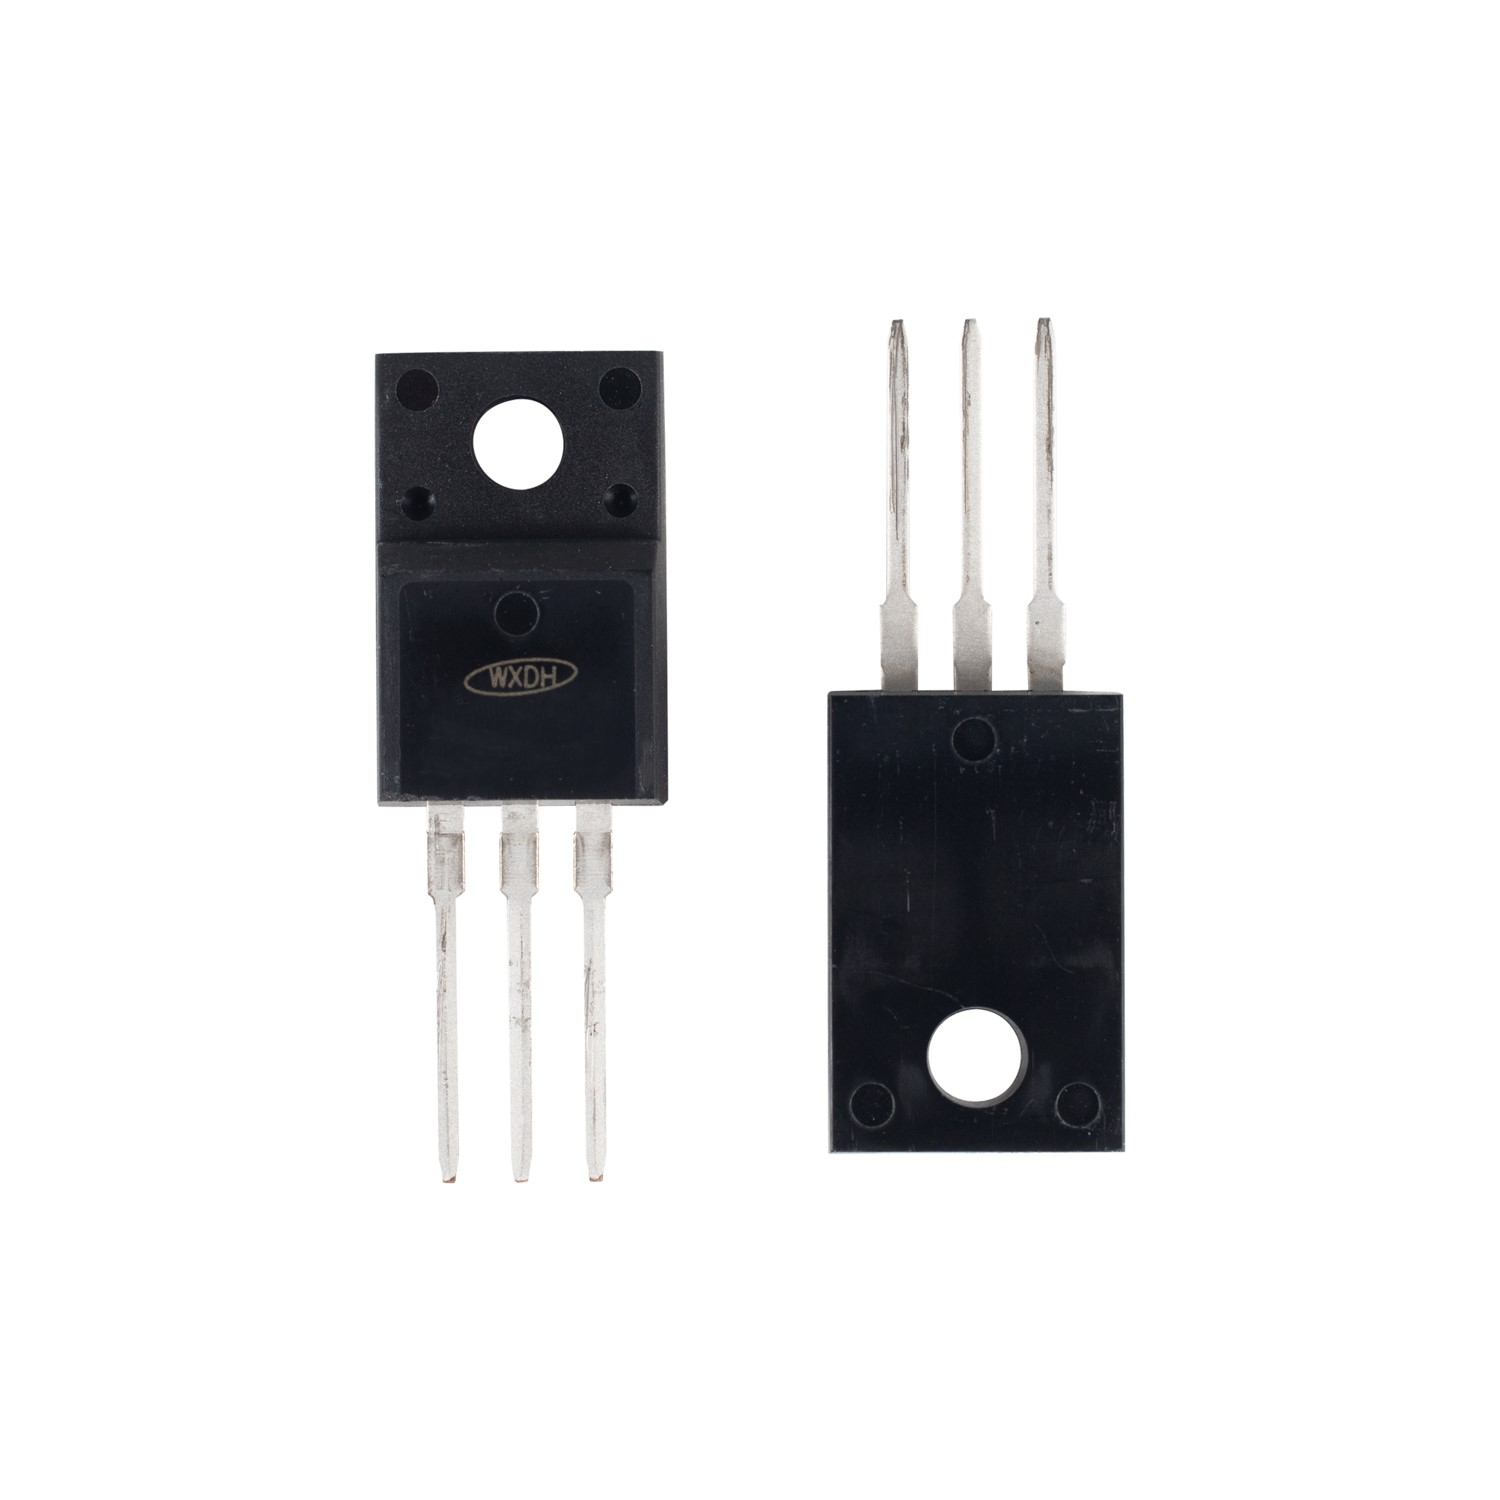 174A 85V N-channel Enhancement Mode Power MOSFET